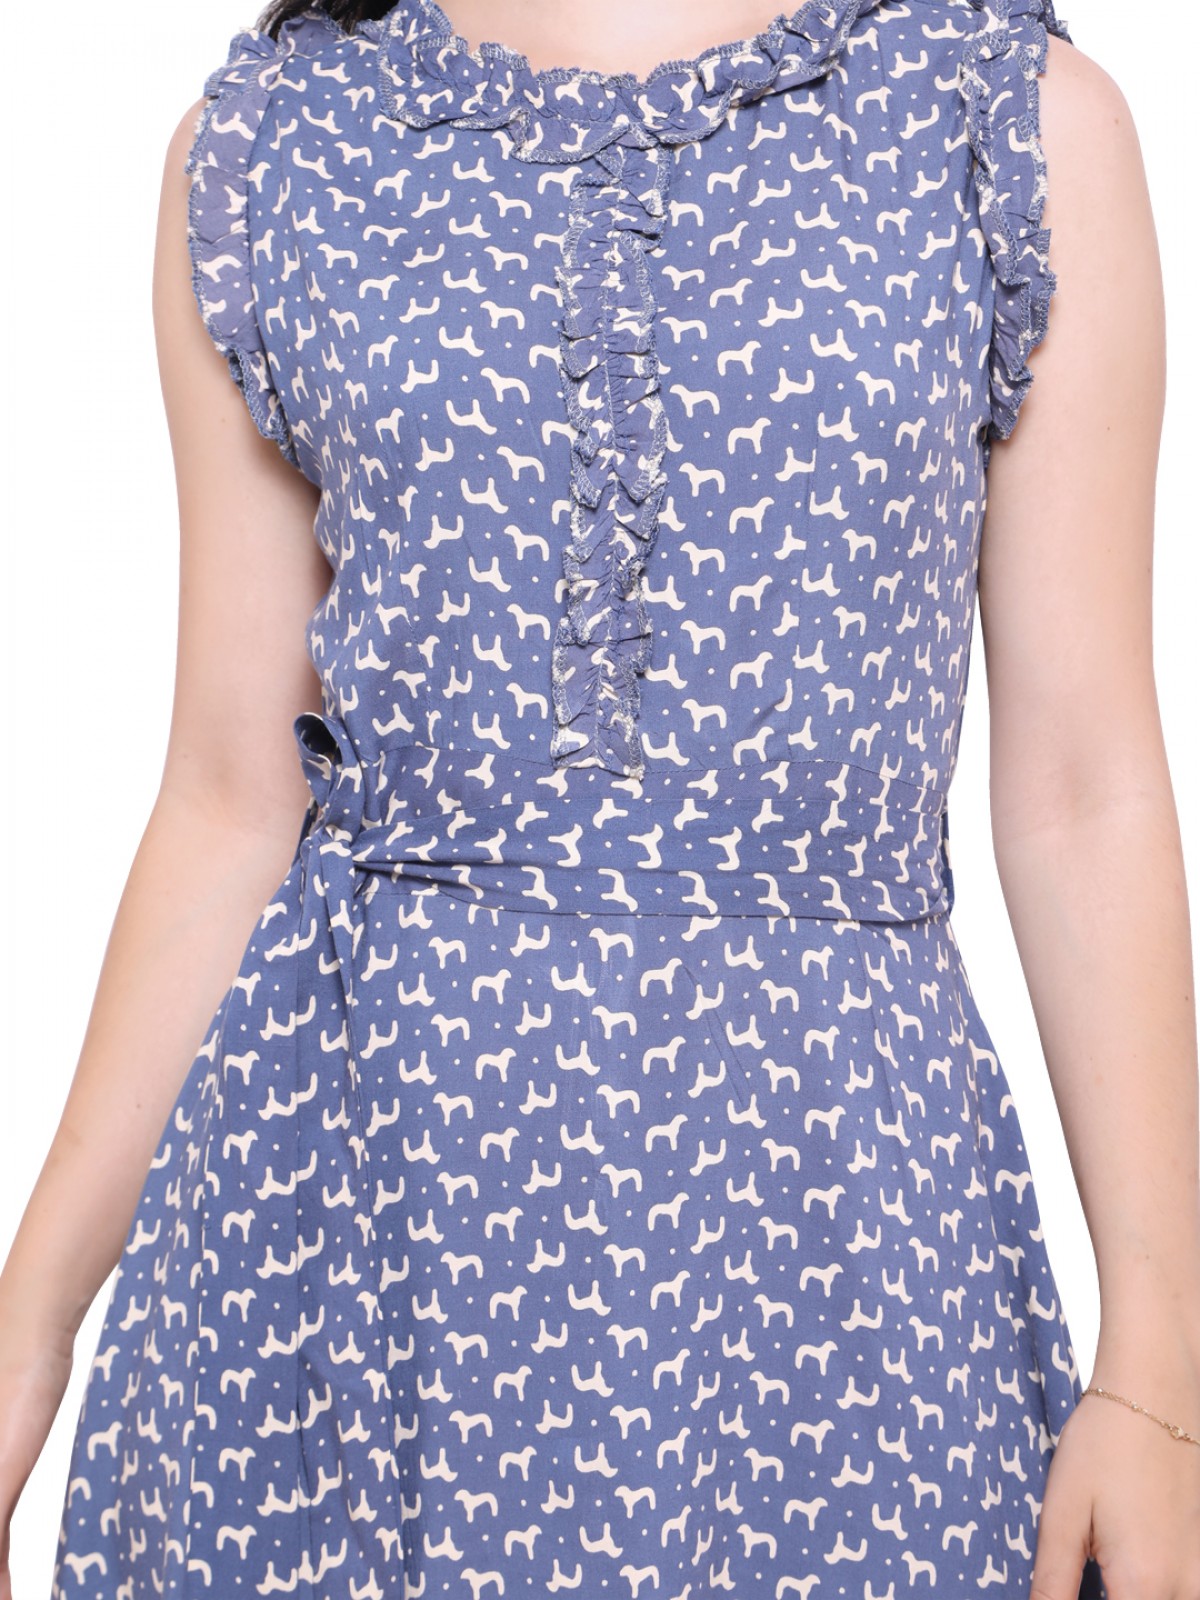 Sky Blue Animal Printed Fit And Flare Frill Sleeveless Dress